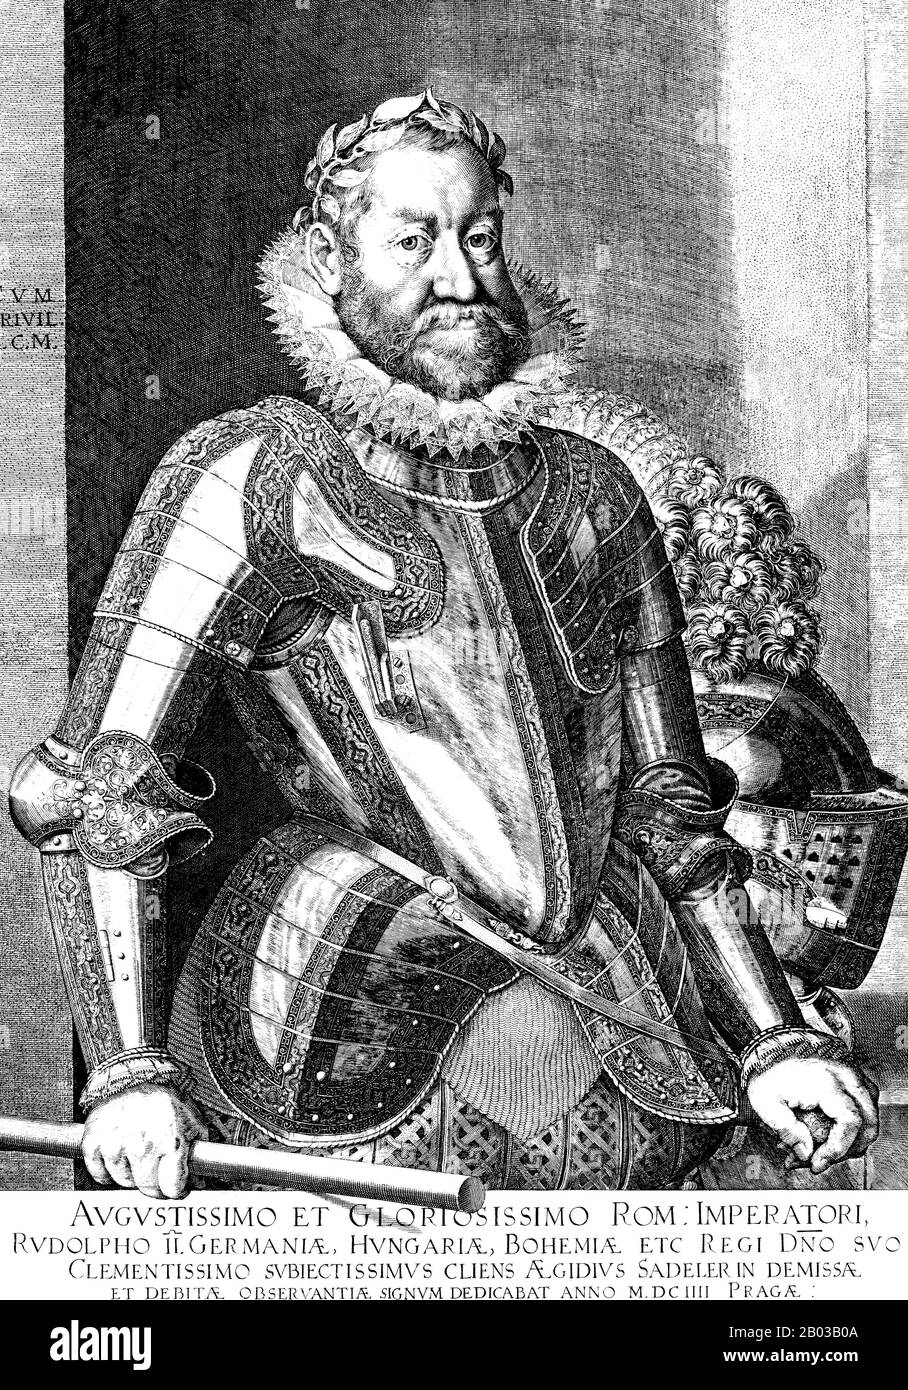 Rudolf II (1552-1612) was the eldest son and successor of Emperor Maximilian II. He became King of Hungary and Croatia in 1572, and by the time of his father's death in 1576, had also inherited the Bohemian, German and Holy Roman crowns. Stock Photo